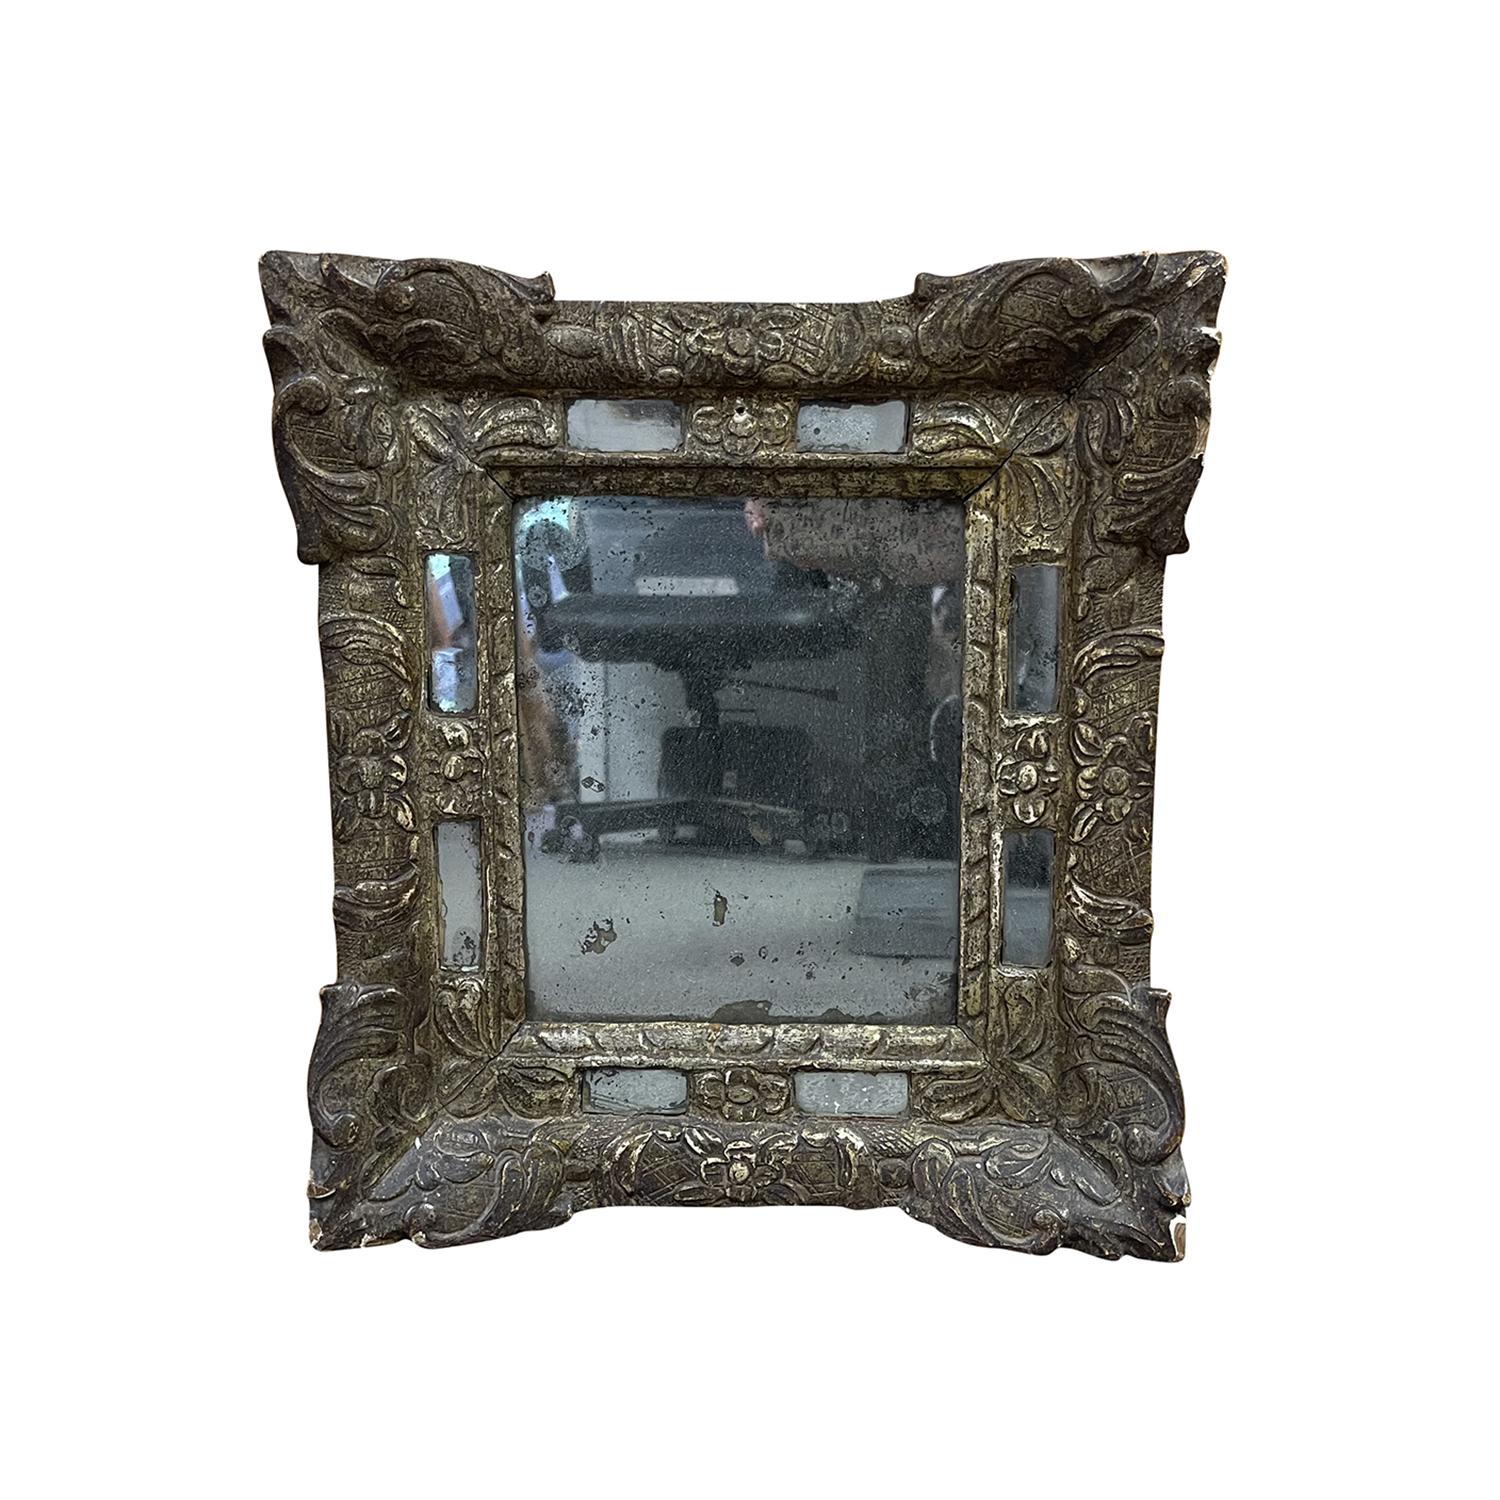 An antique 18th Century double framed French Giltwood wall mirror, hand carved in wood with the original mirror plate, in good condition. Decorated with an elegant floral border. Minor fading, due to age. Wear consistent with age and use. Circa